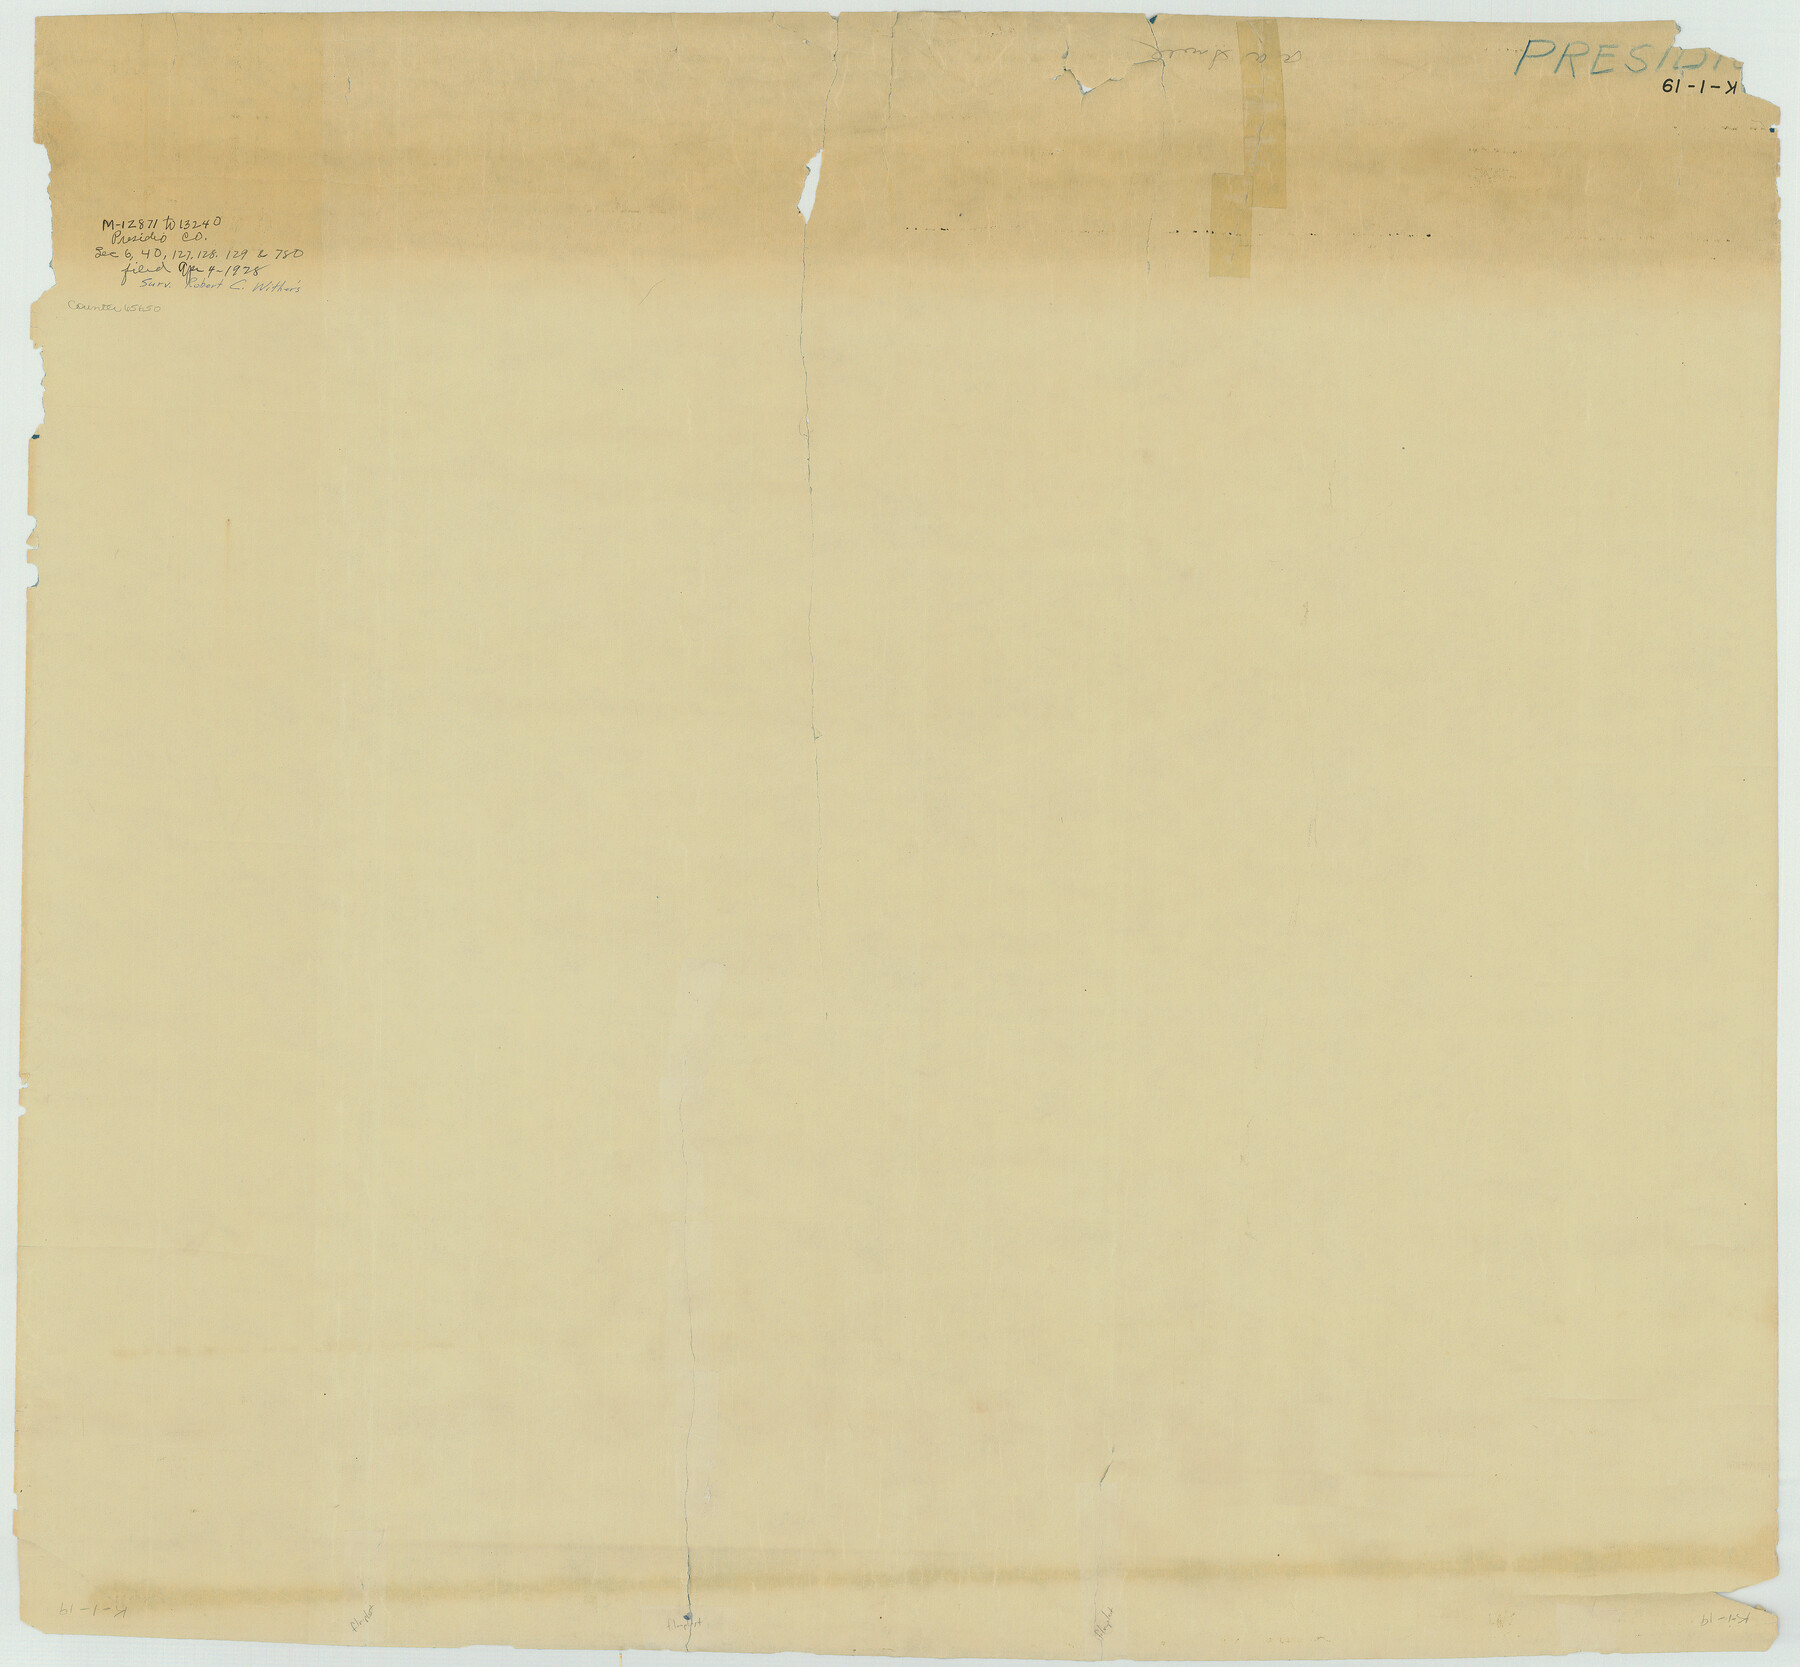 65650, [Sketch for M-12871 to M-13240 - Presidio County], General Map Collection